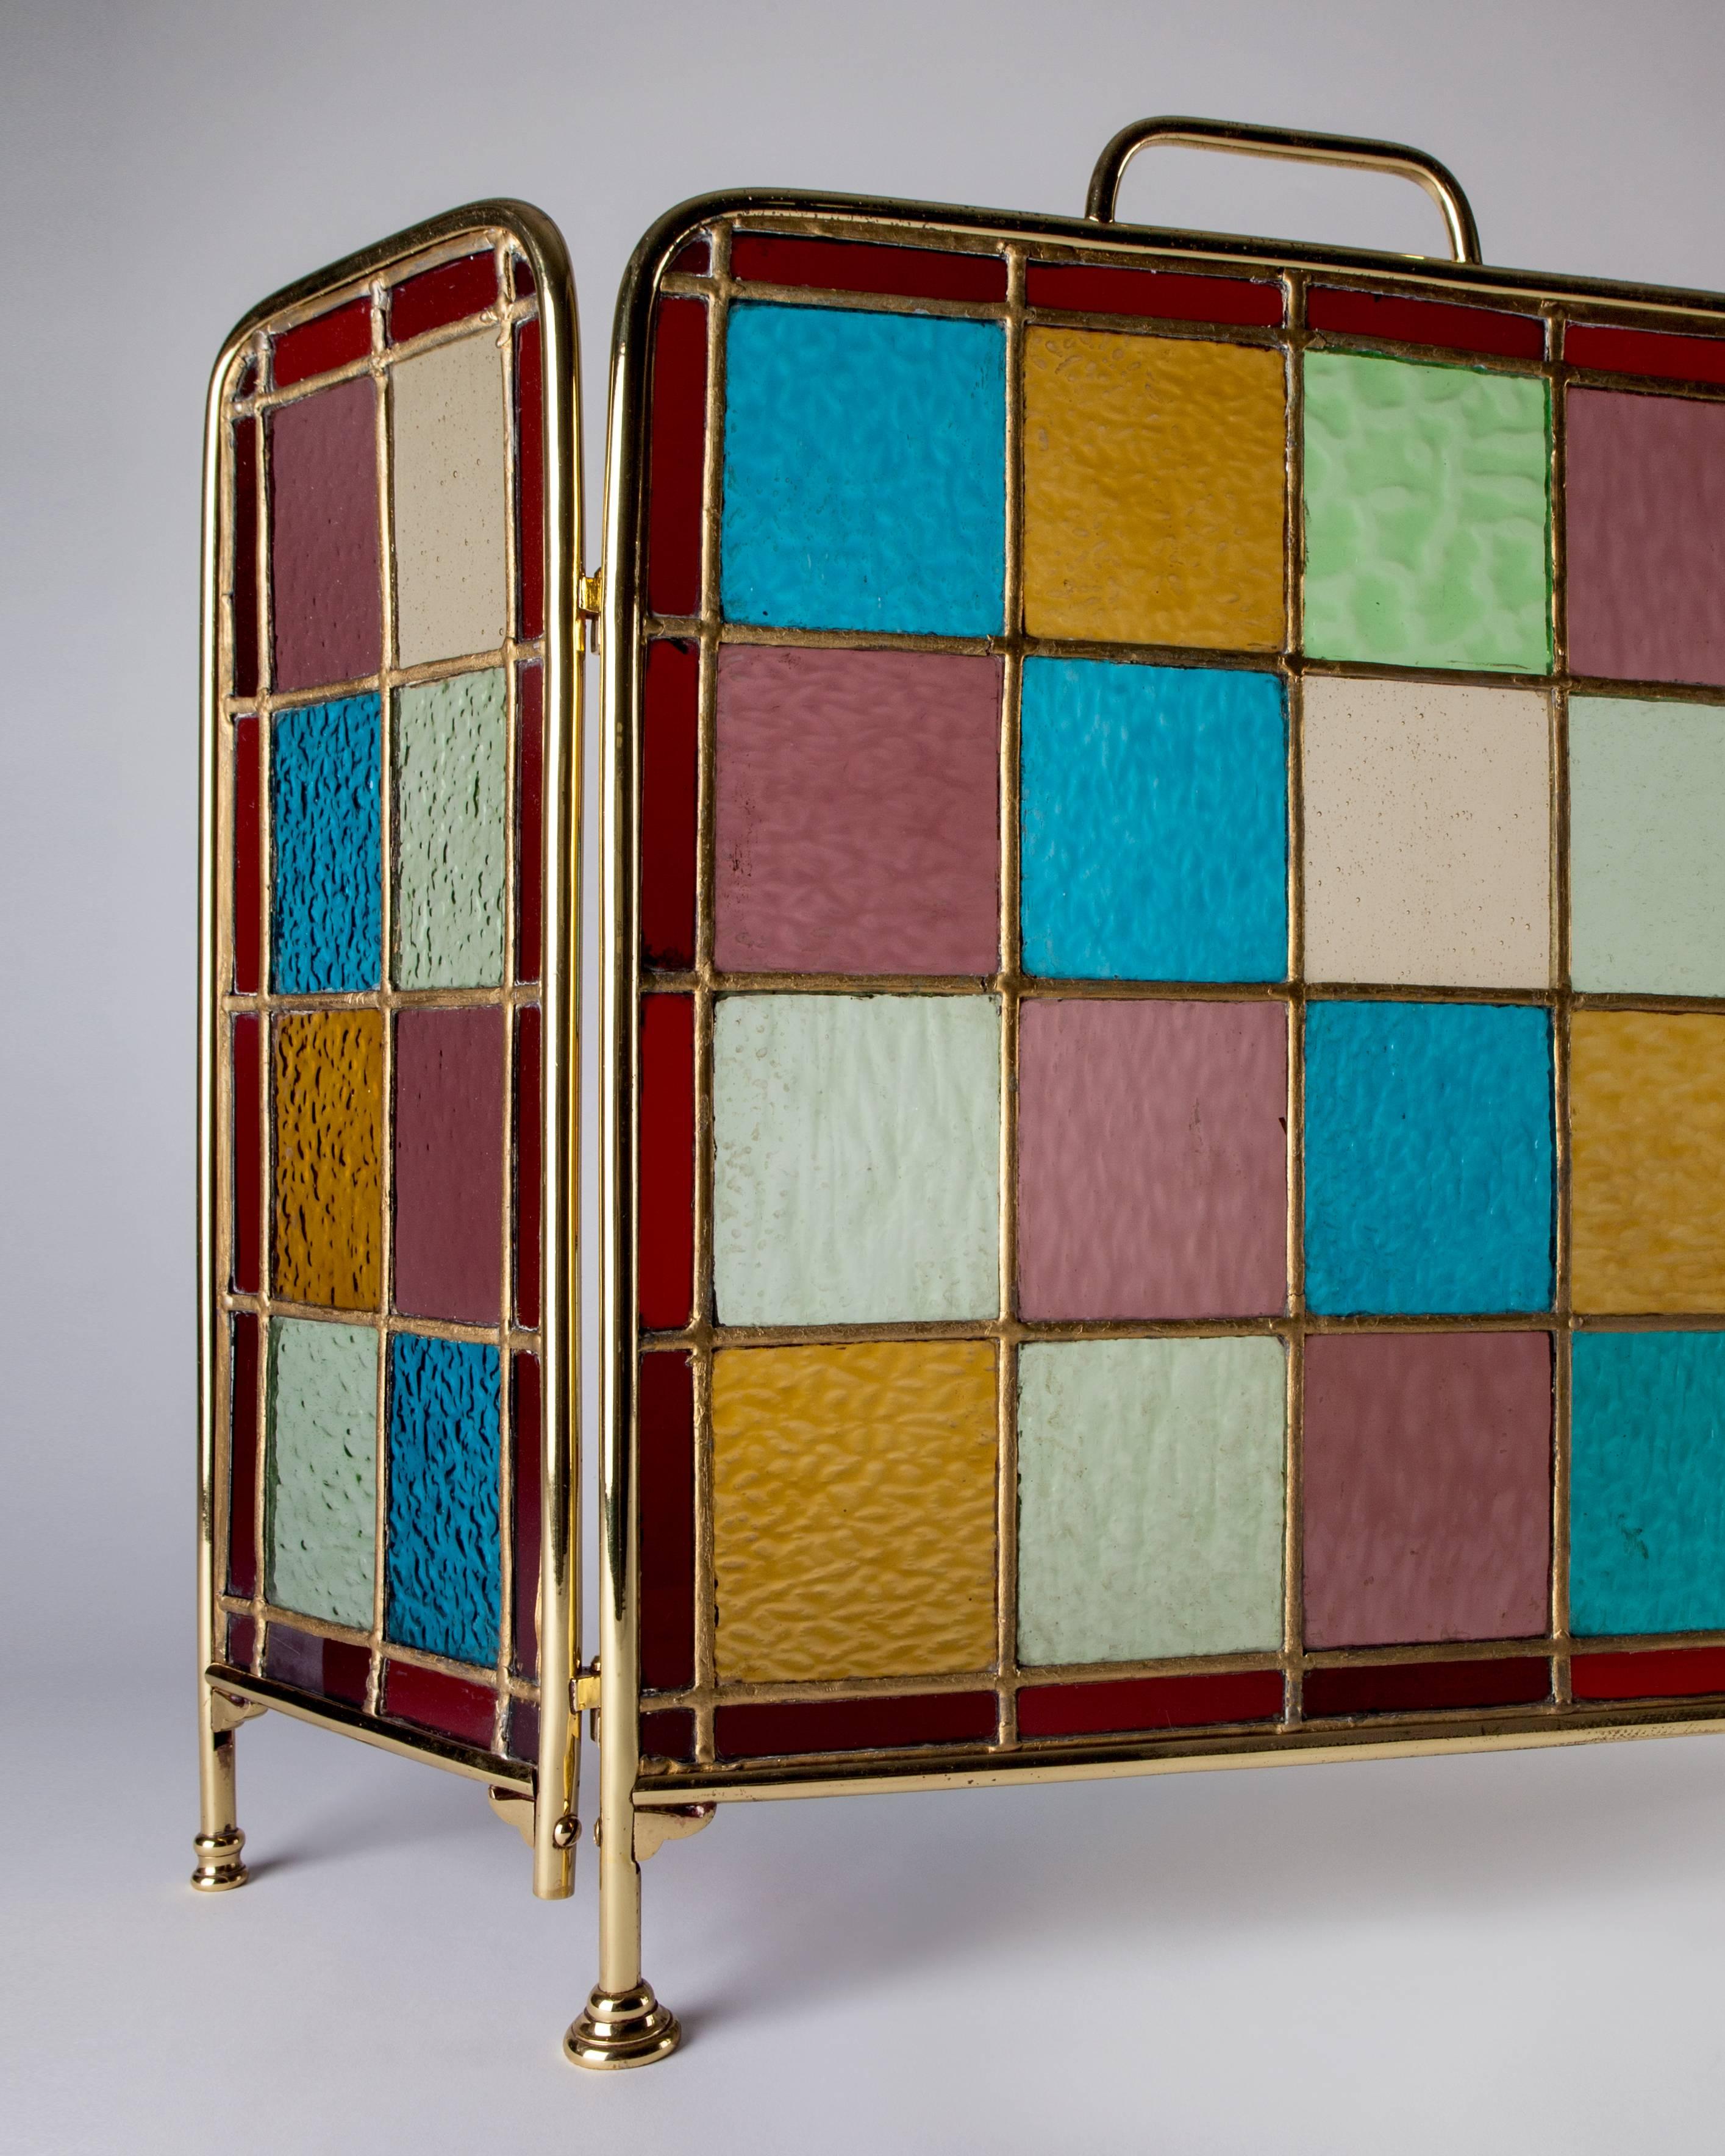 AFP0518.
An antique English fireplace screen in aged brass with leaded glass panels in amber, lavender, blue, green, and pale yellow. Due to the antique nature of this fixture, there may be some nicks or imperfections in the